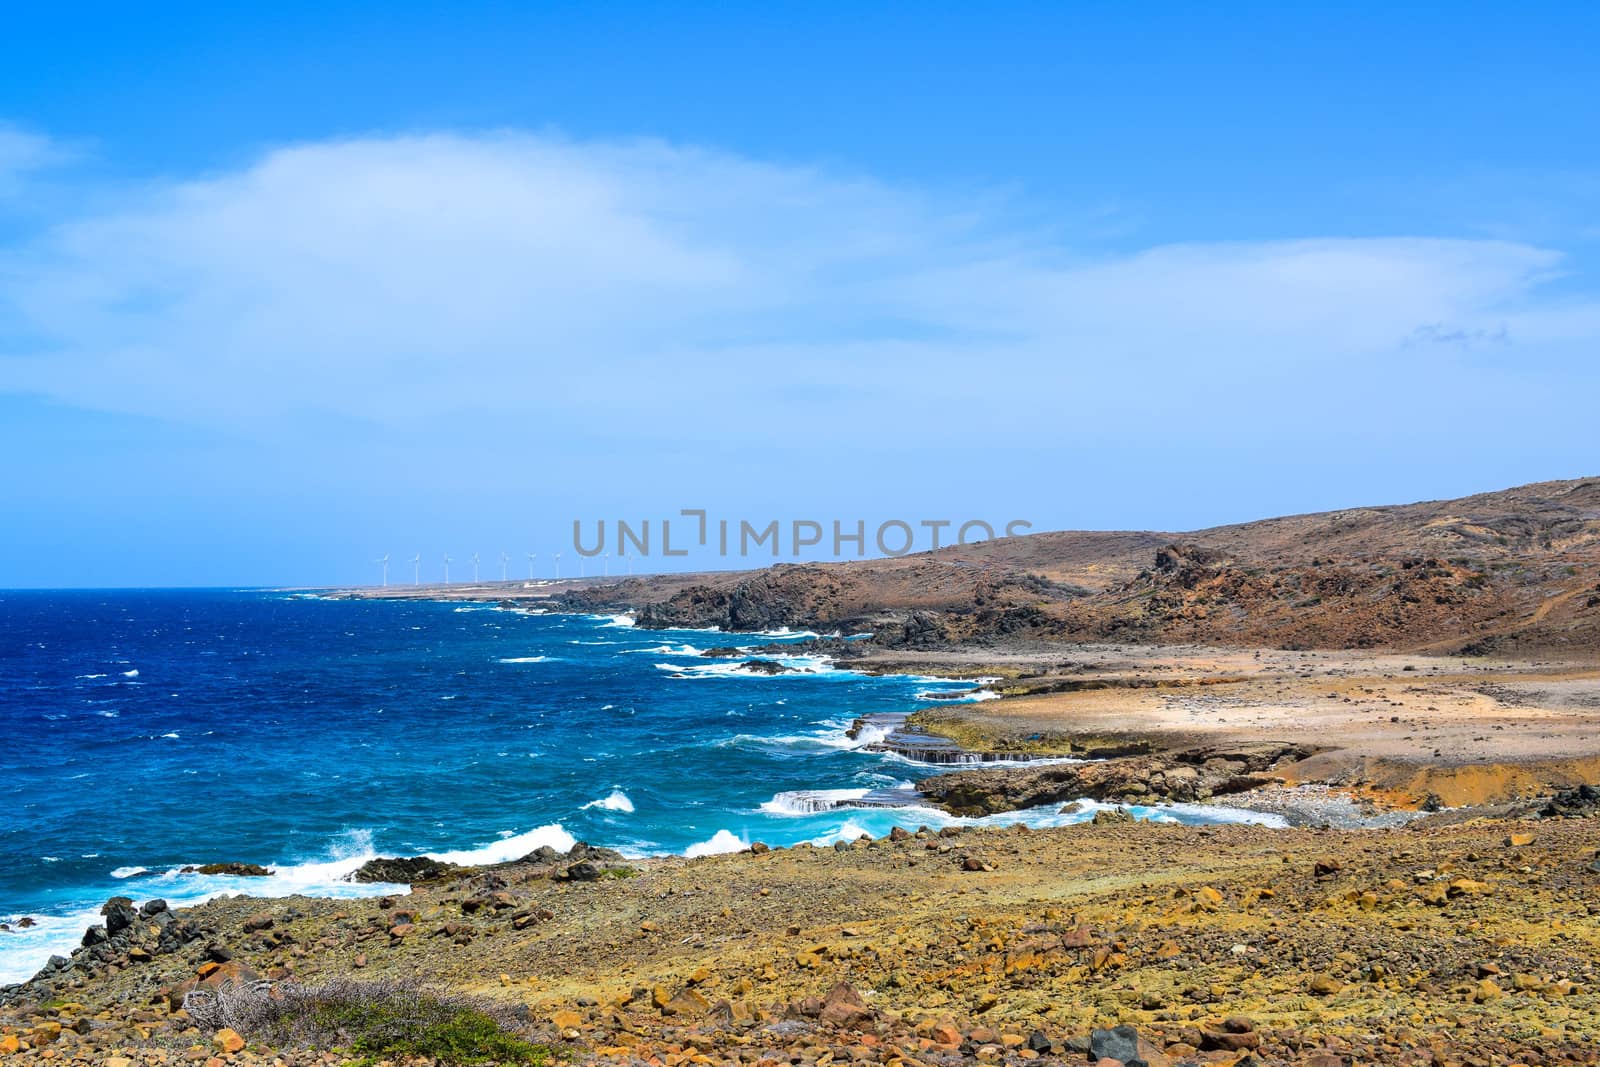 Arikok Natural Park on the island of Aruba in the Caribbean Sea with deserts and ocean waves on the rocky coast by matteobartolini